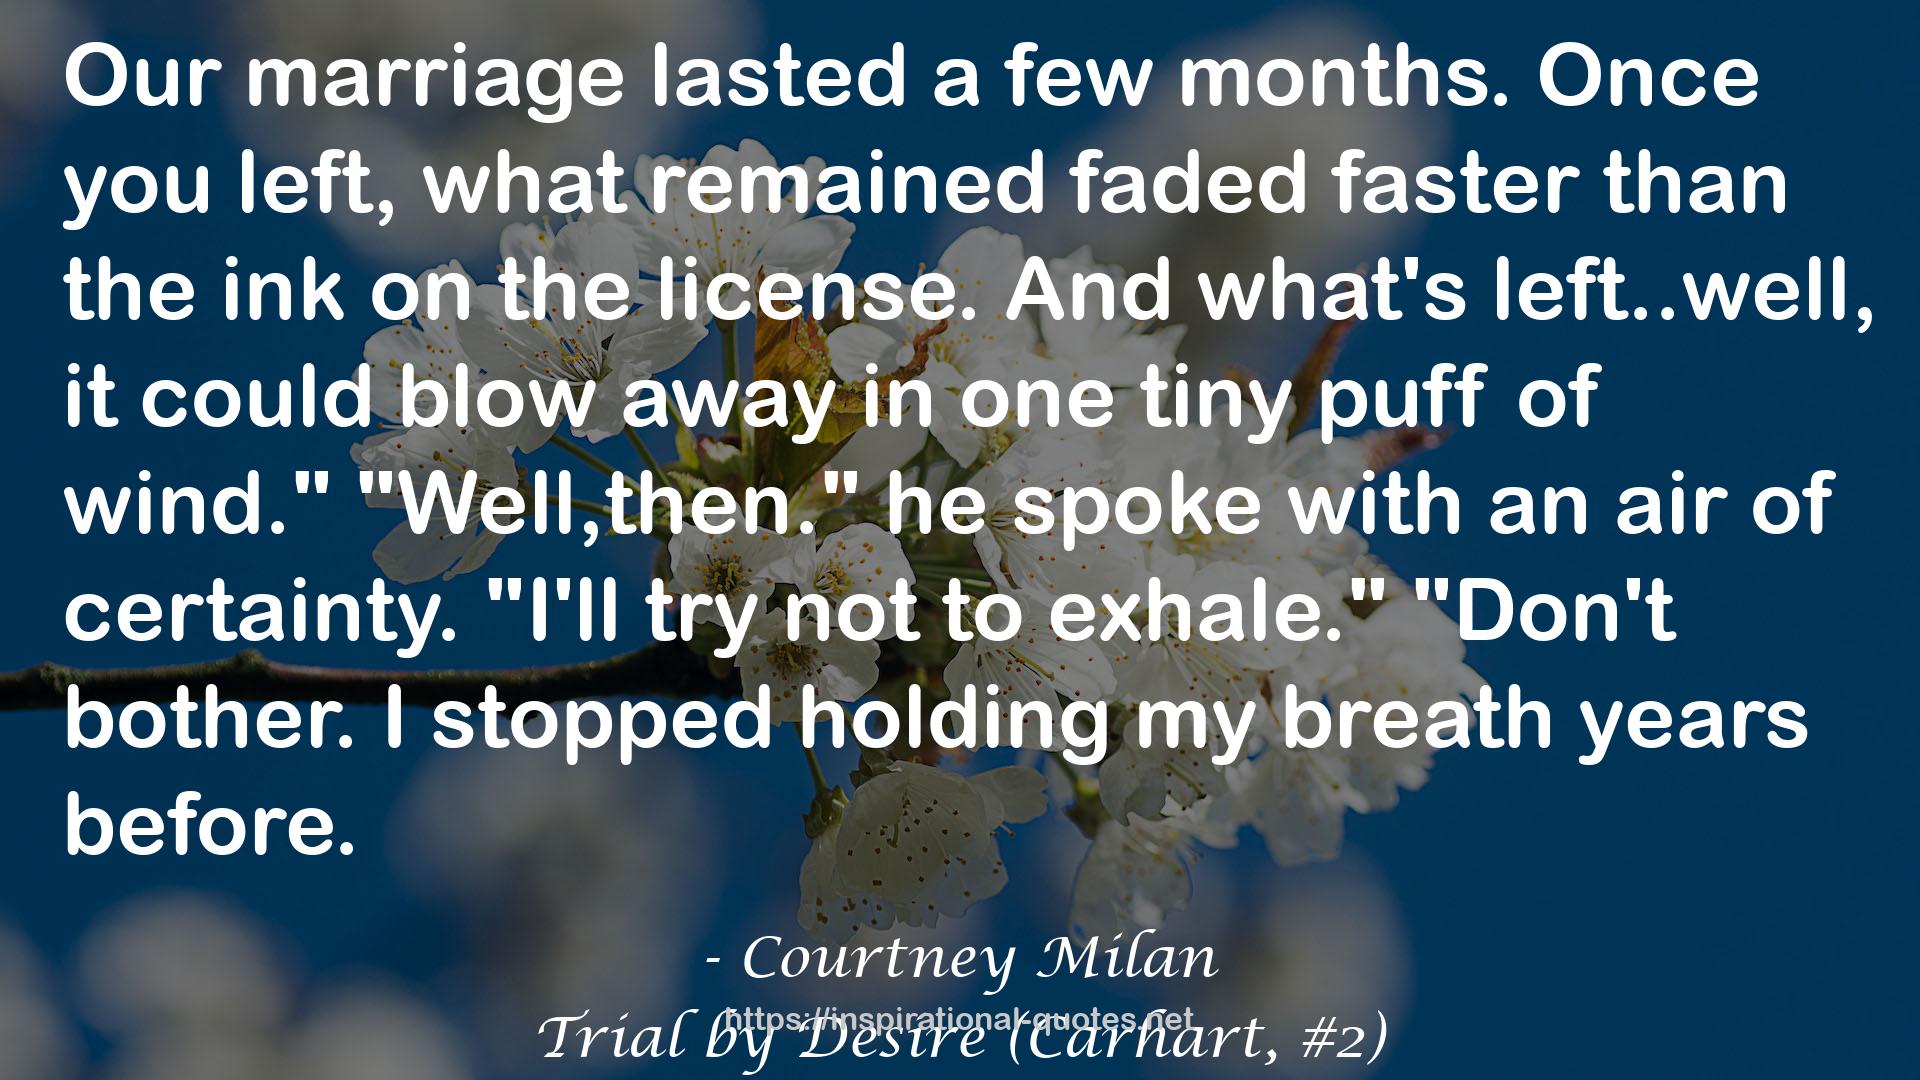 Trial by Desire (Carhart, #2) QUOTES